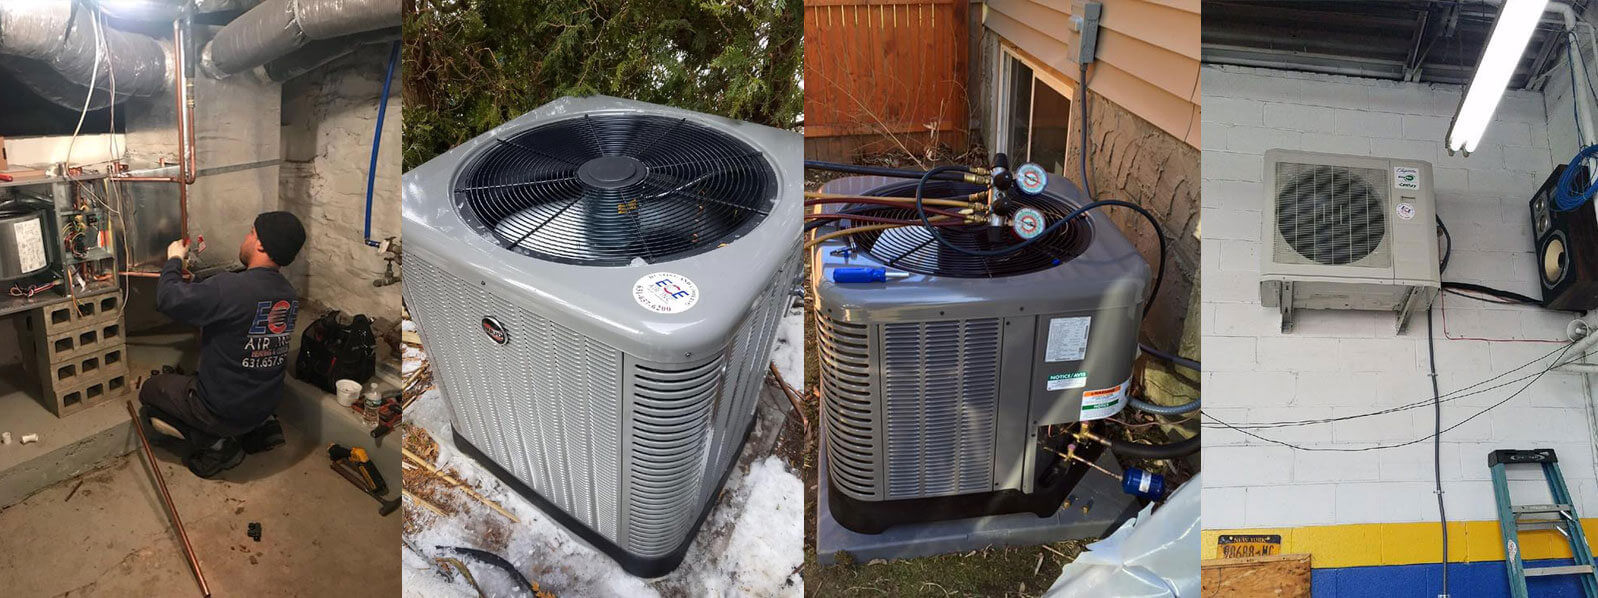 Air Conditioning Repair East Moriches NY